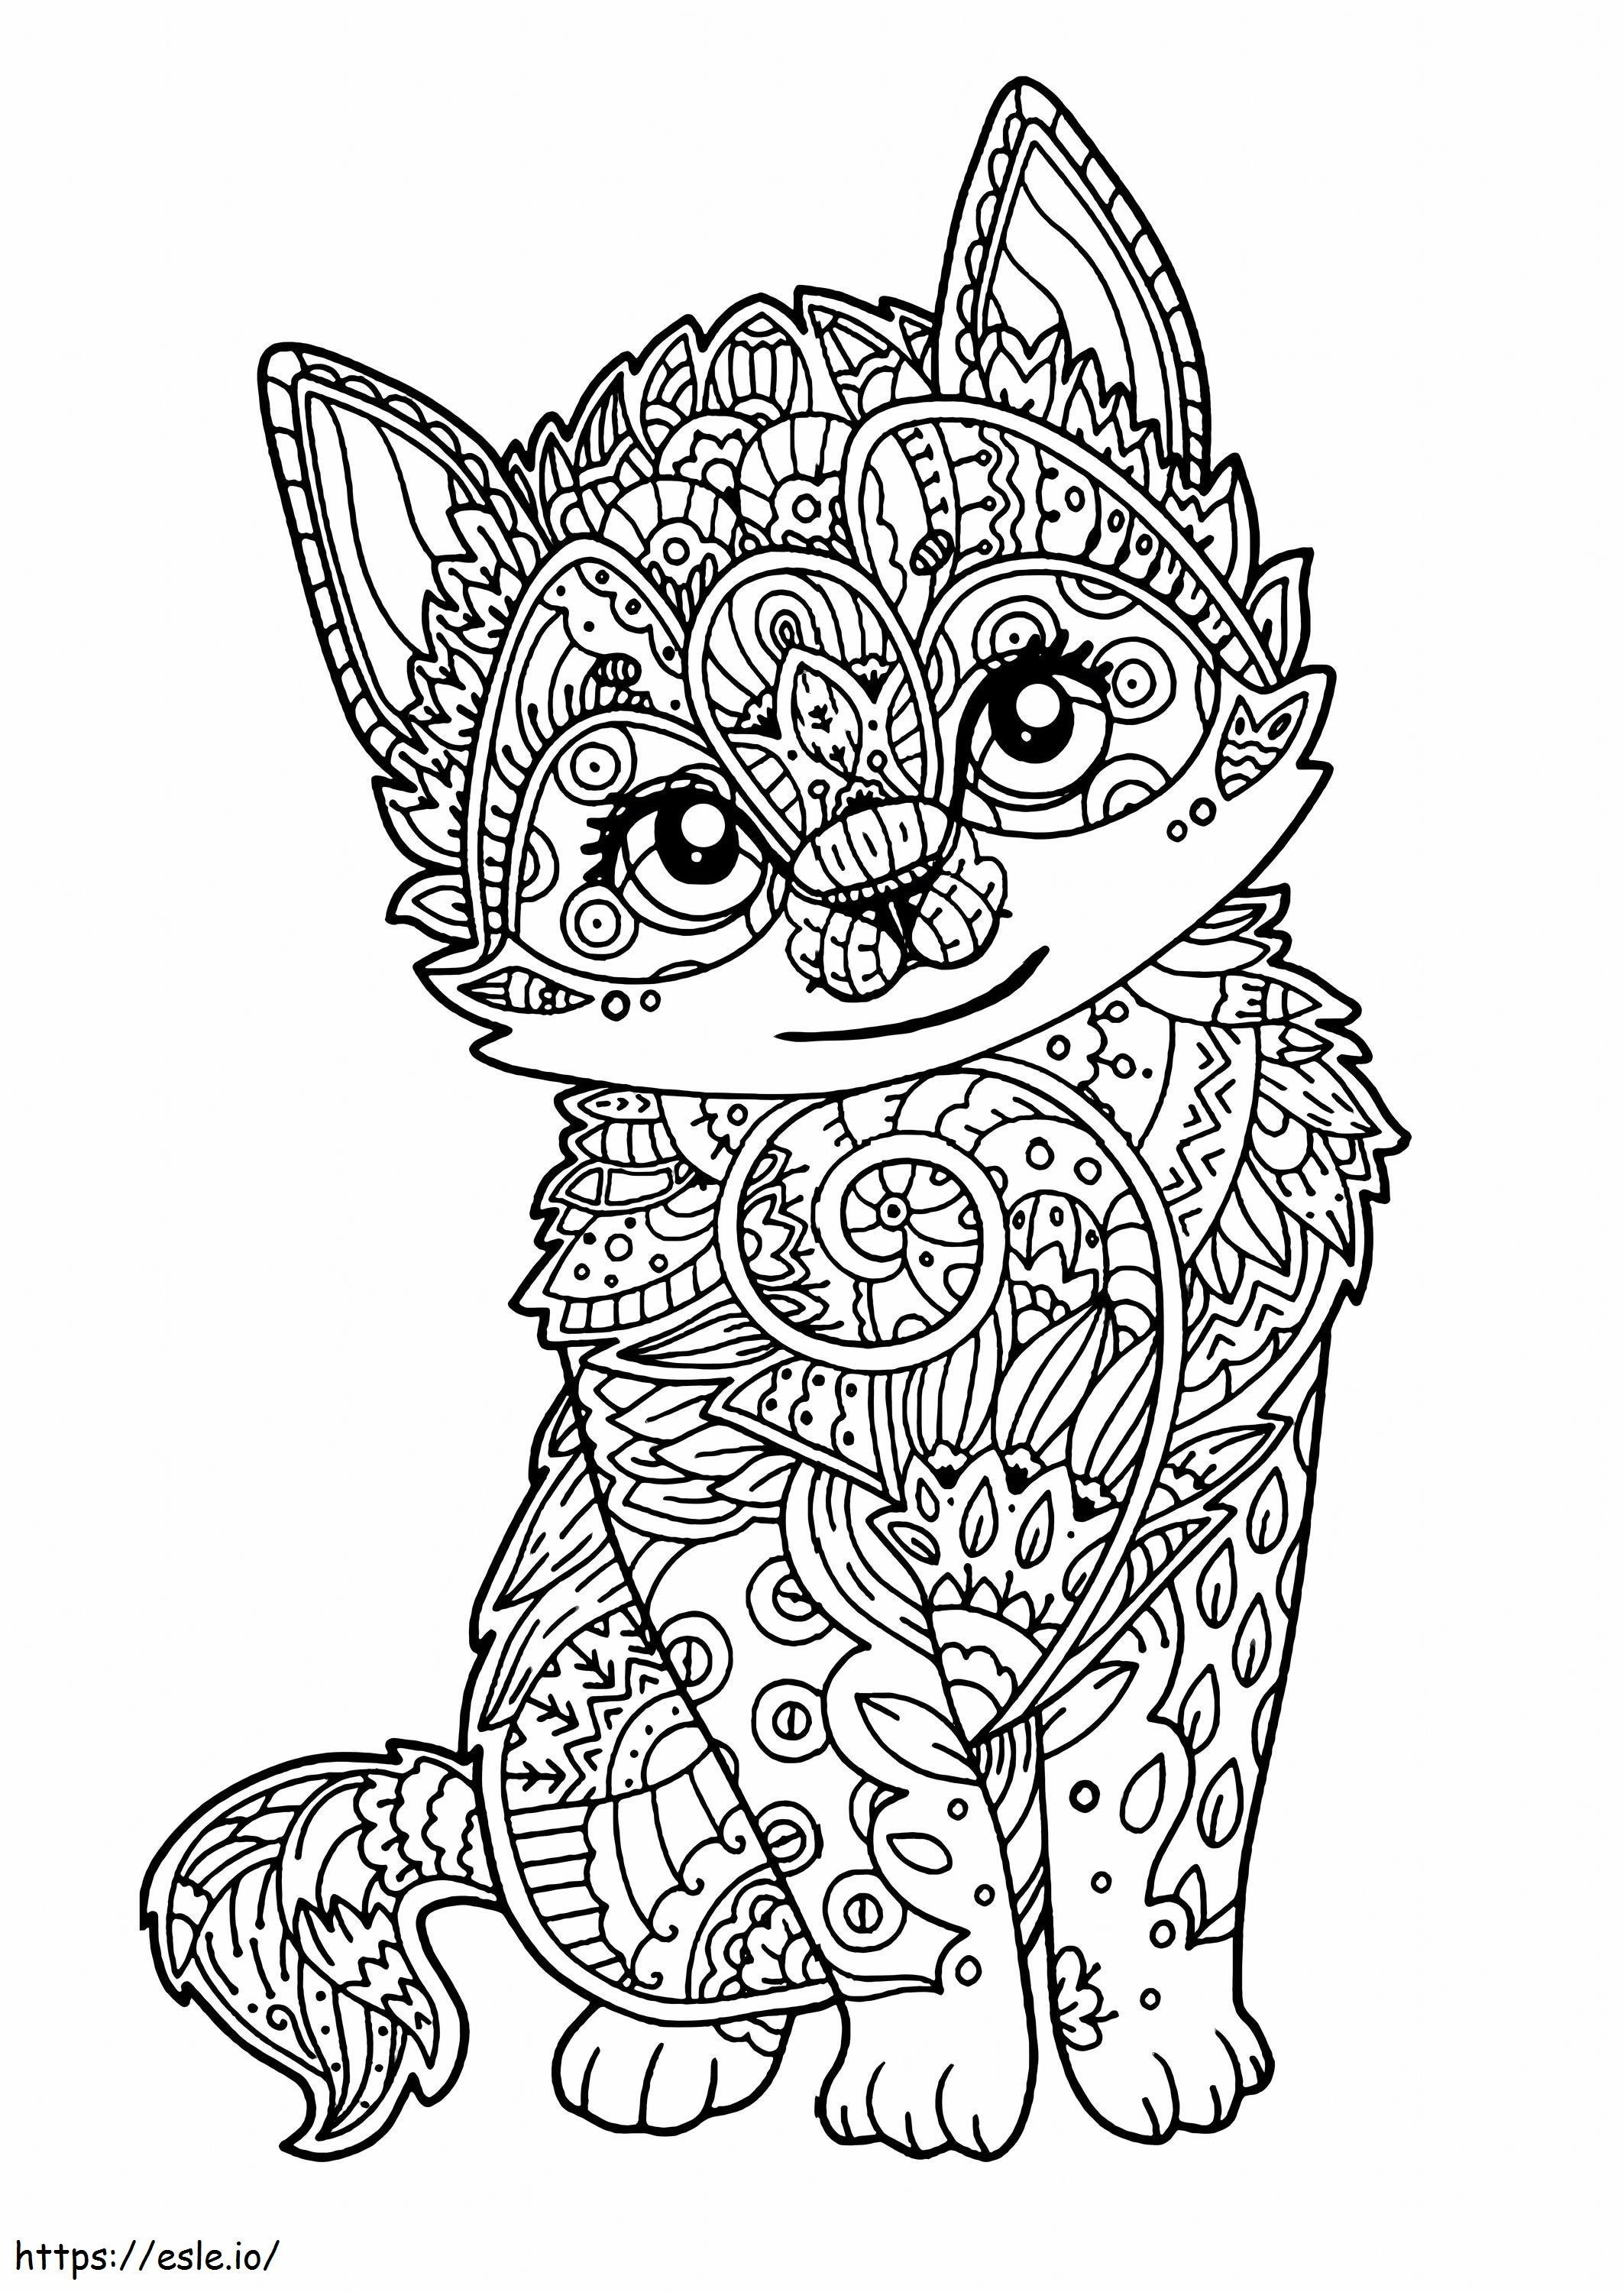 The Kitten Is Scaled For Adult coloring page